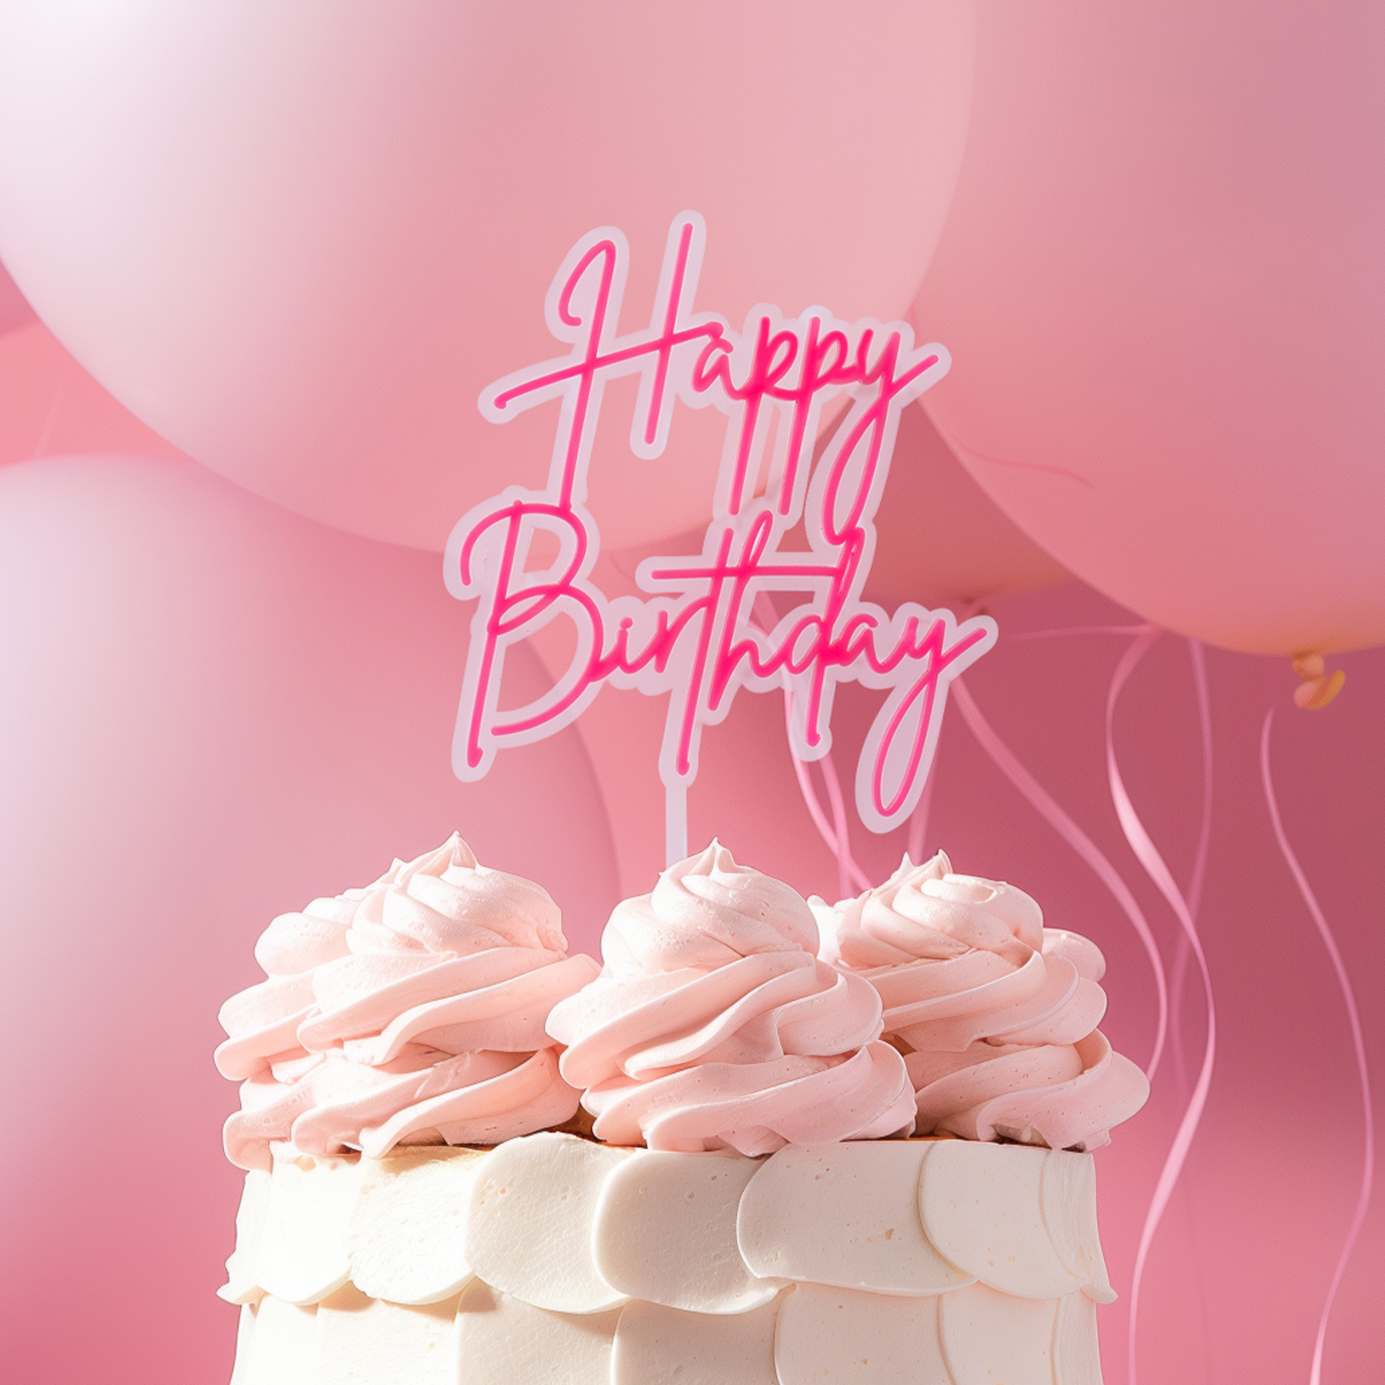 HOT PINK / OPAQUE Layered Cake Topper - HAPPY BIRTHDAY